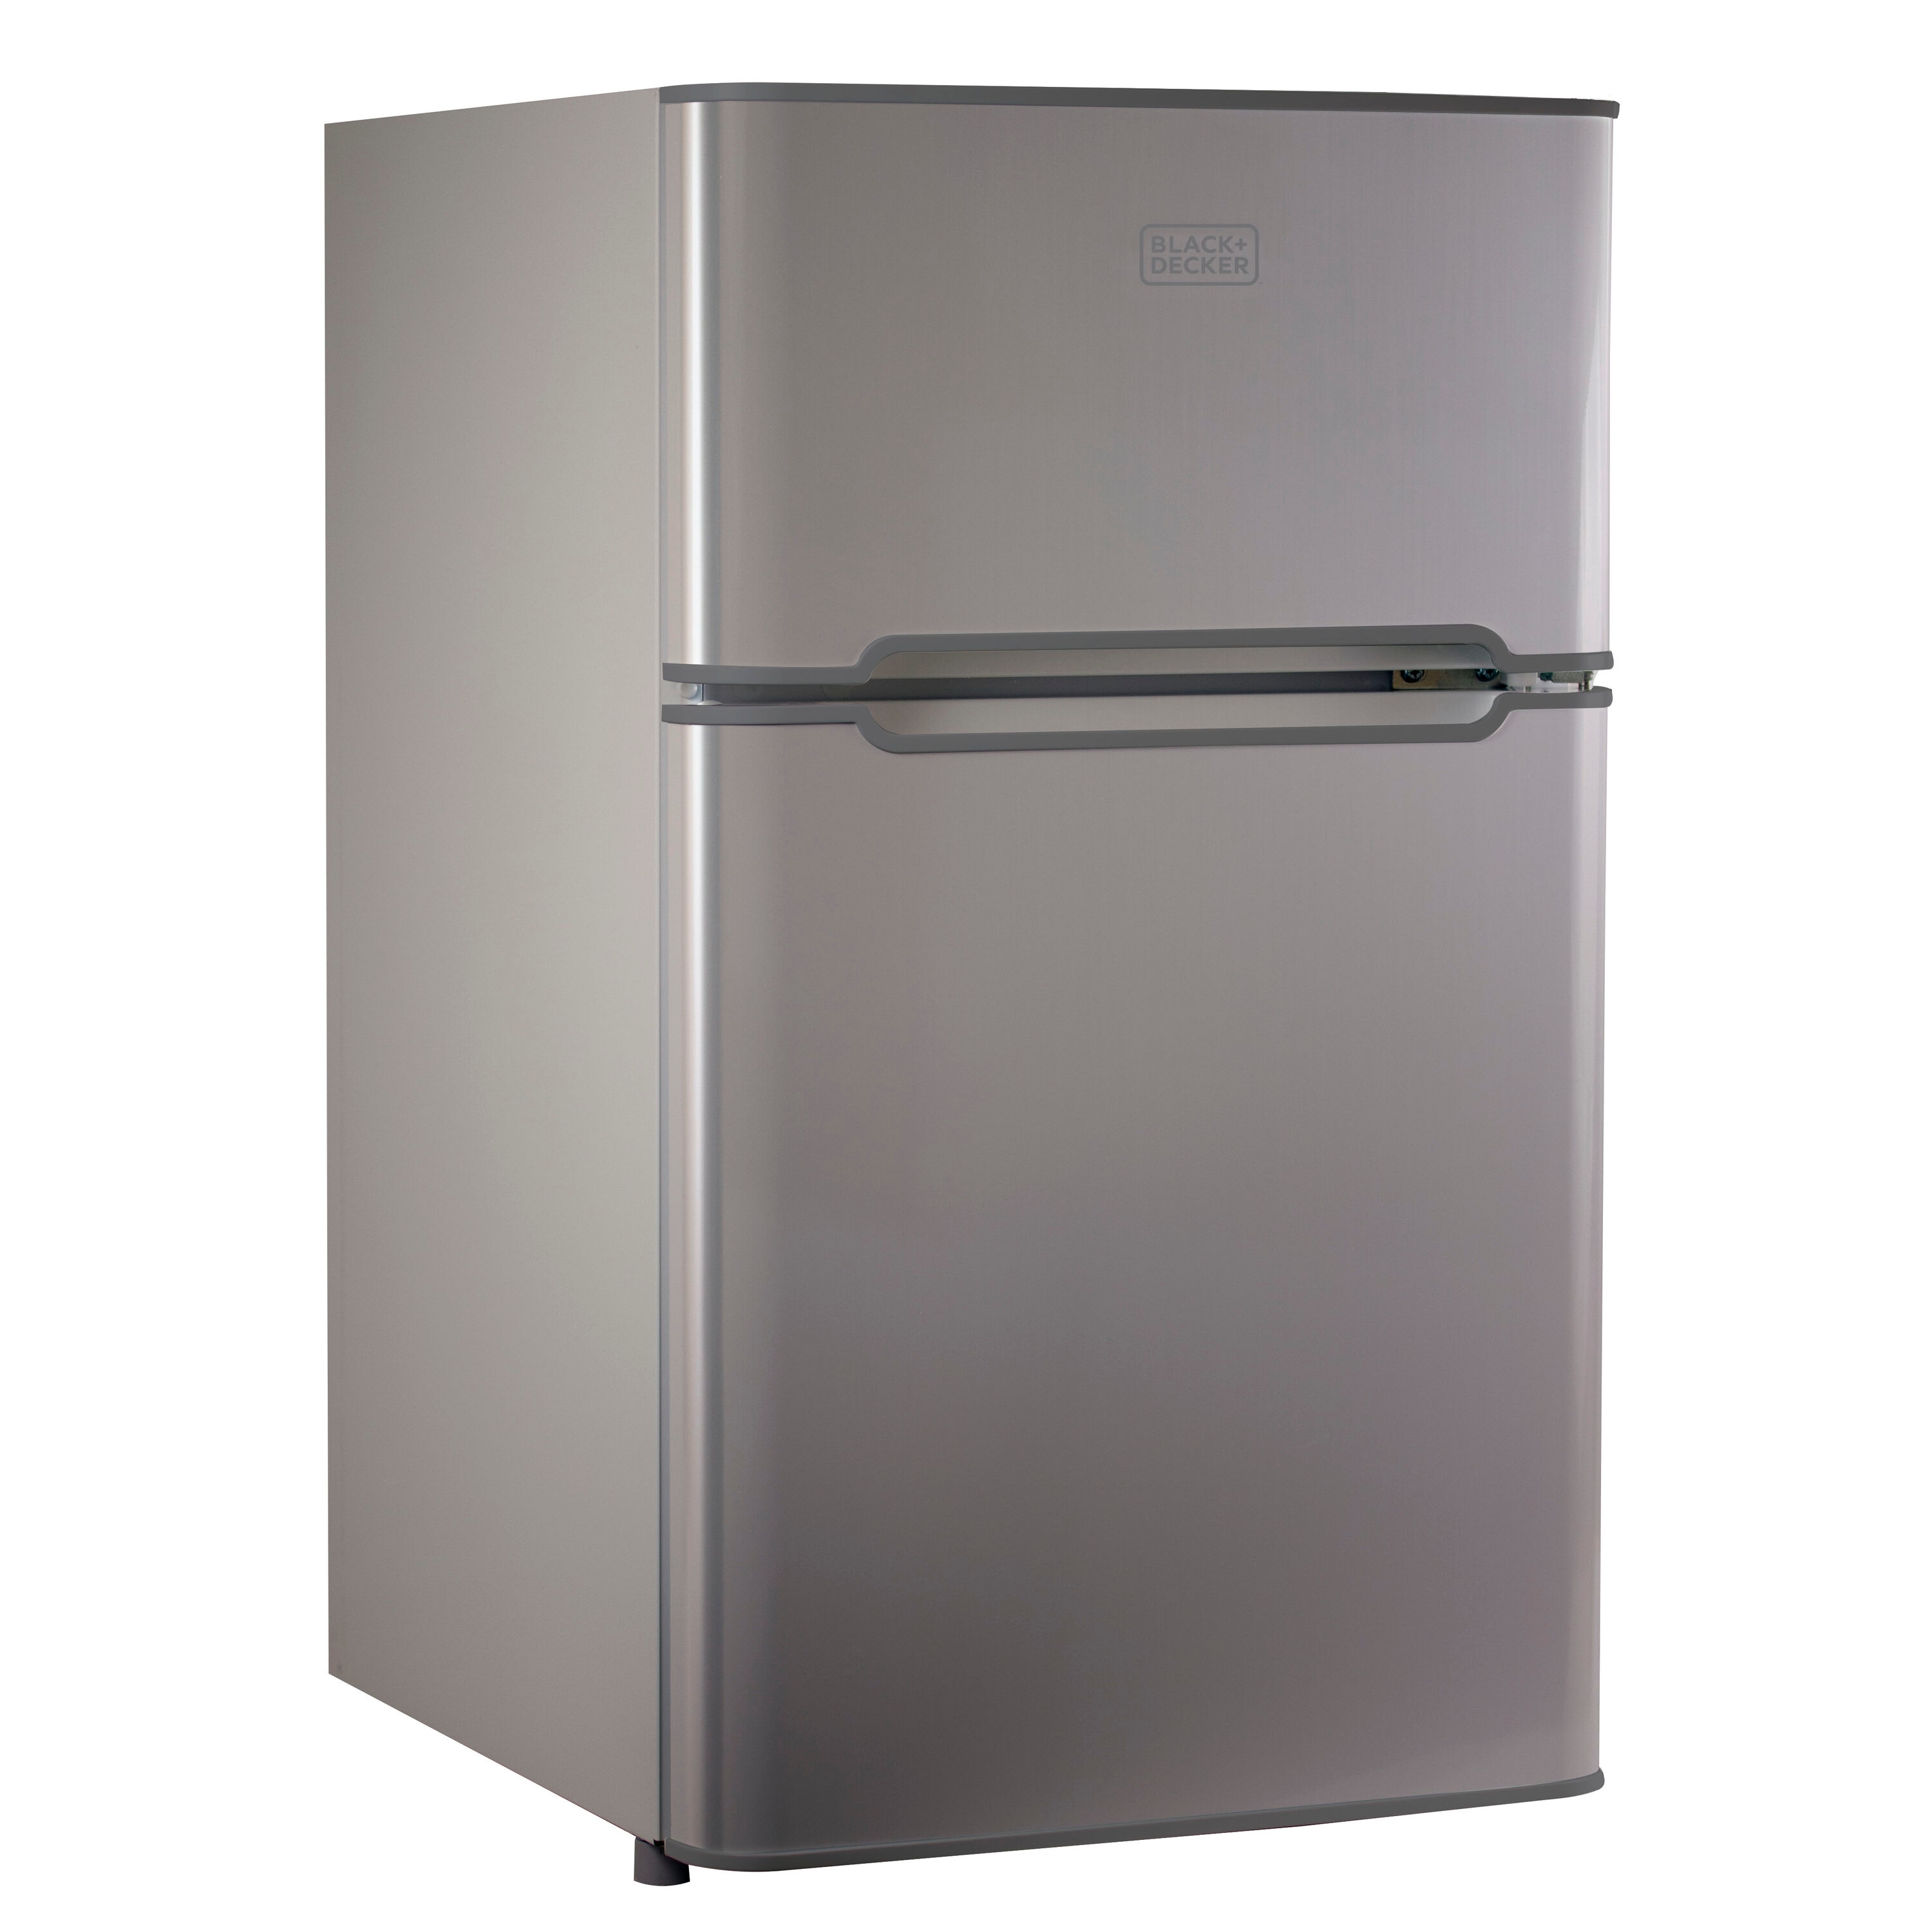 SPT 3.3 Cu.Ft. Compact Refrigerator with Energy Star - Stainless